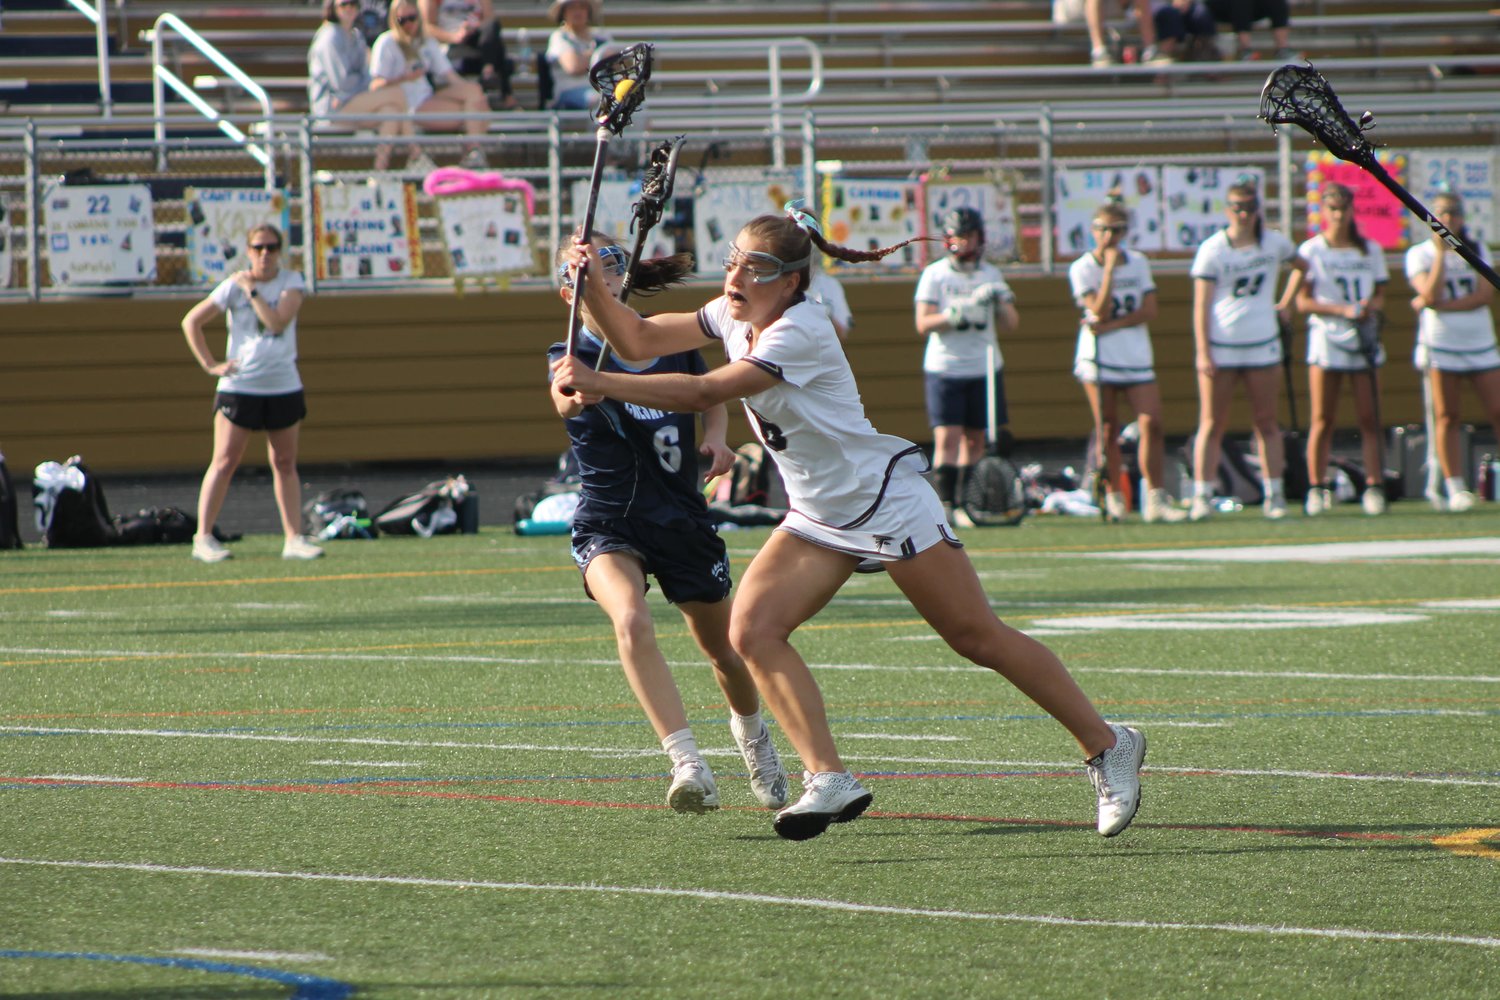 Maddy Goger scored on this shot on goal off a free play.